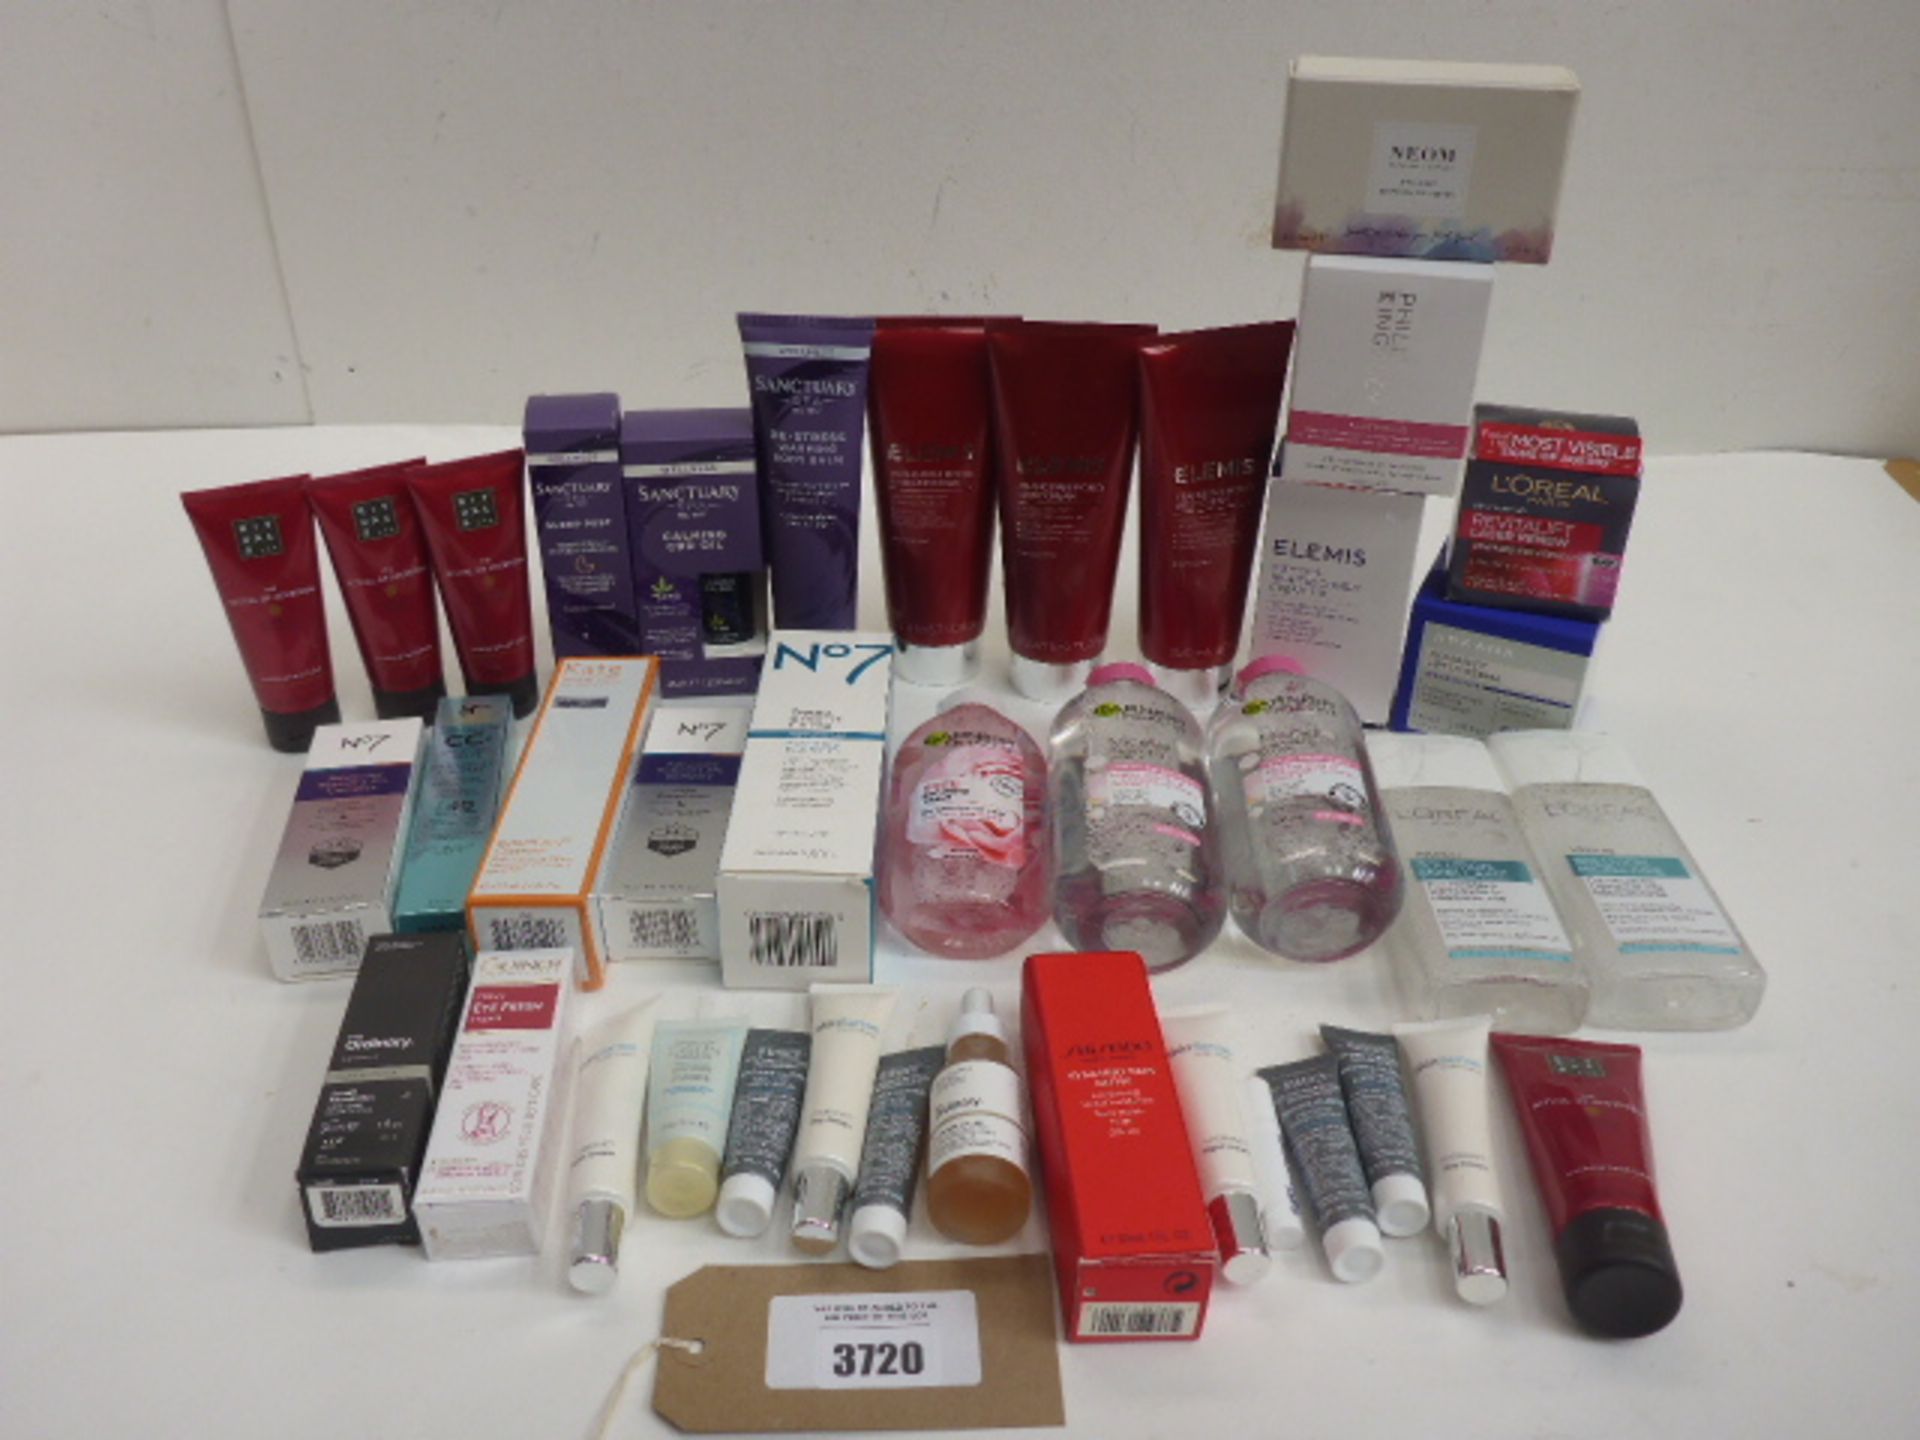 Bag of branded beauty products including Elemis, Neom, L'Oreal, it, No. 7 and others